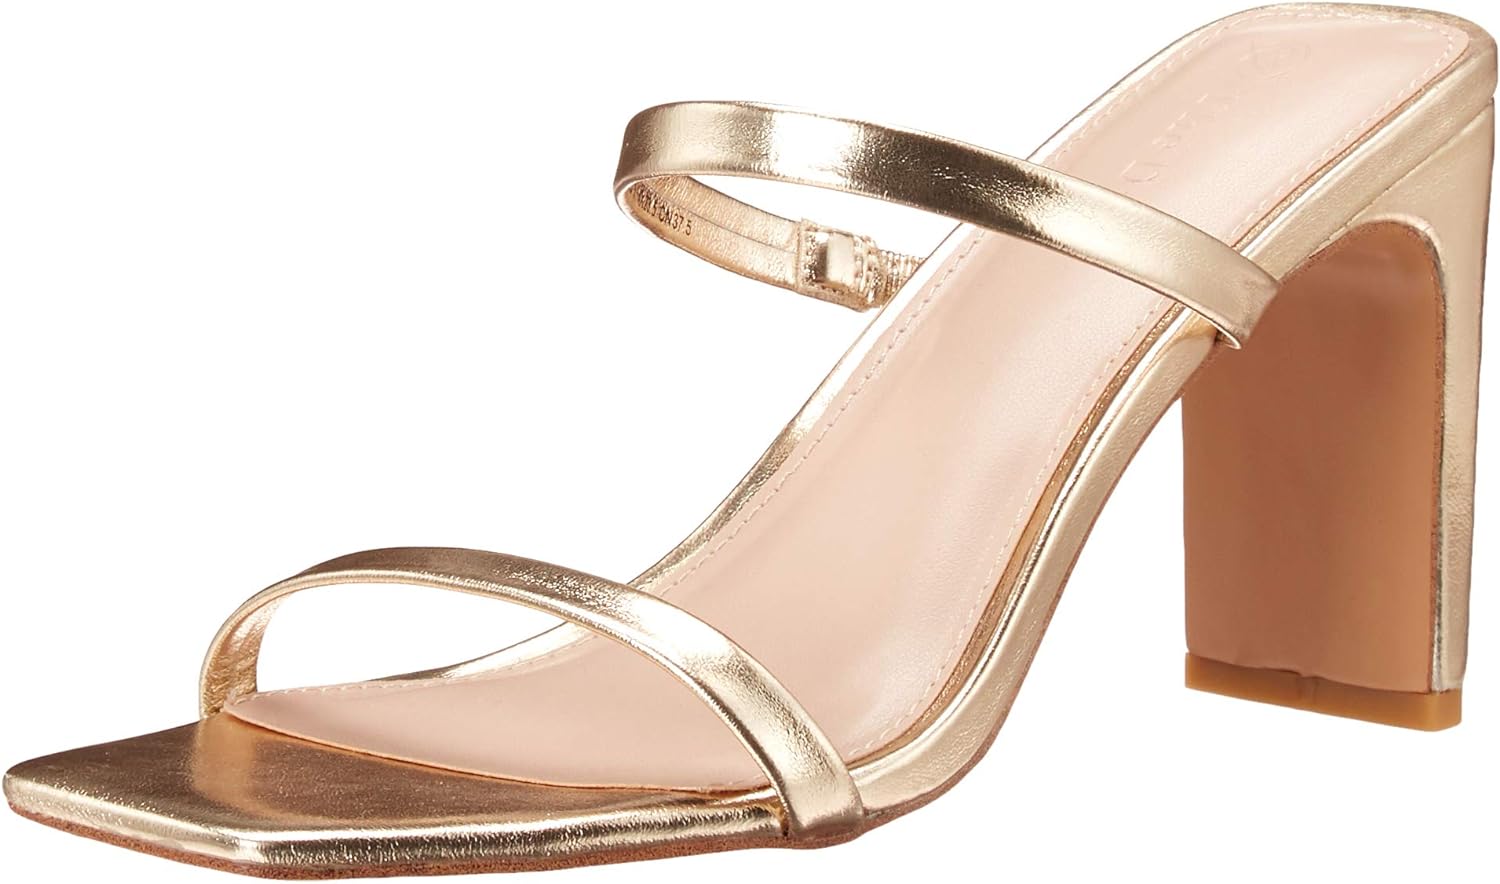 The Drop Women' Avery Square Toe Two Strap High Heeled Sandal